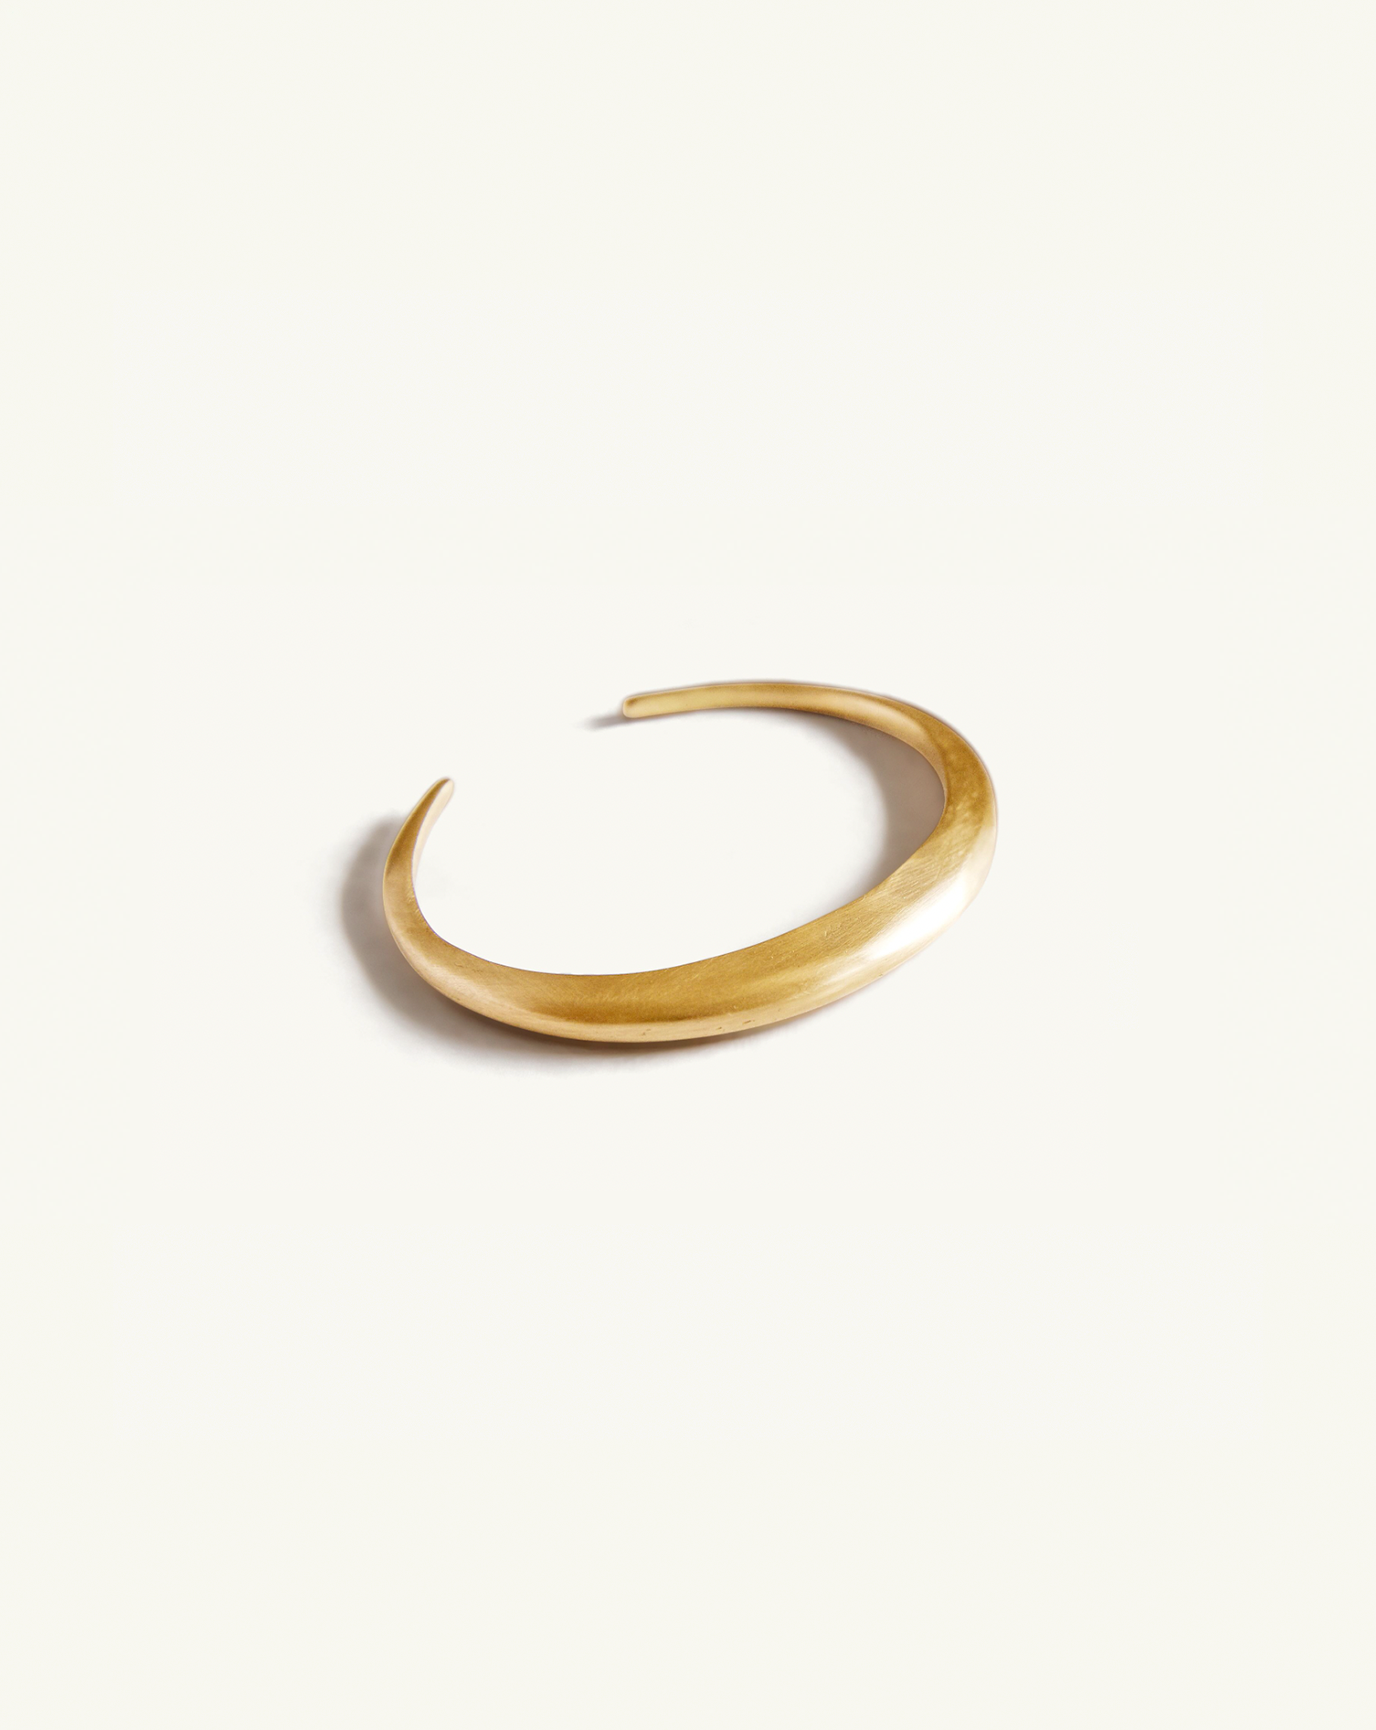 Product image of the open gold bangle on flat surface